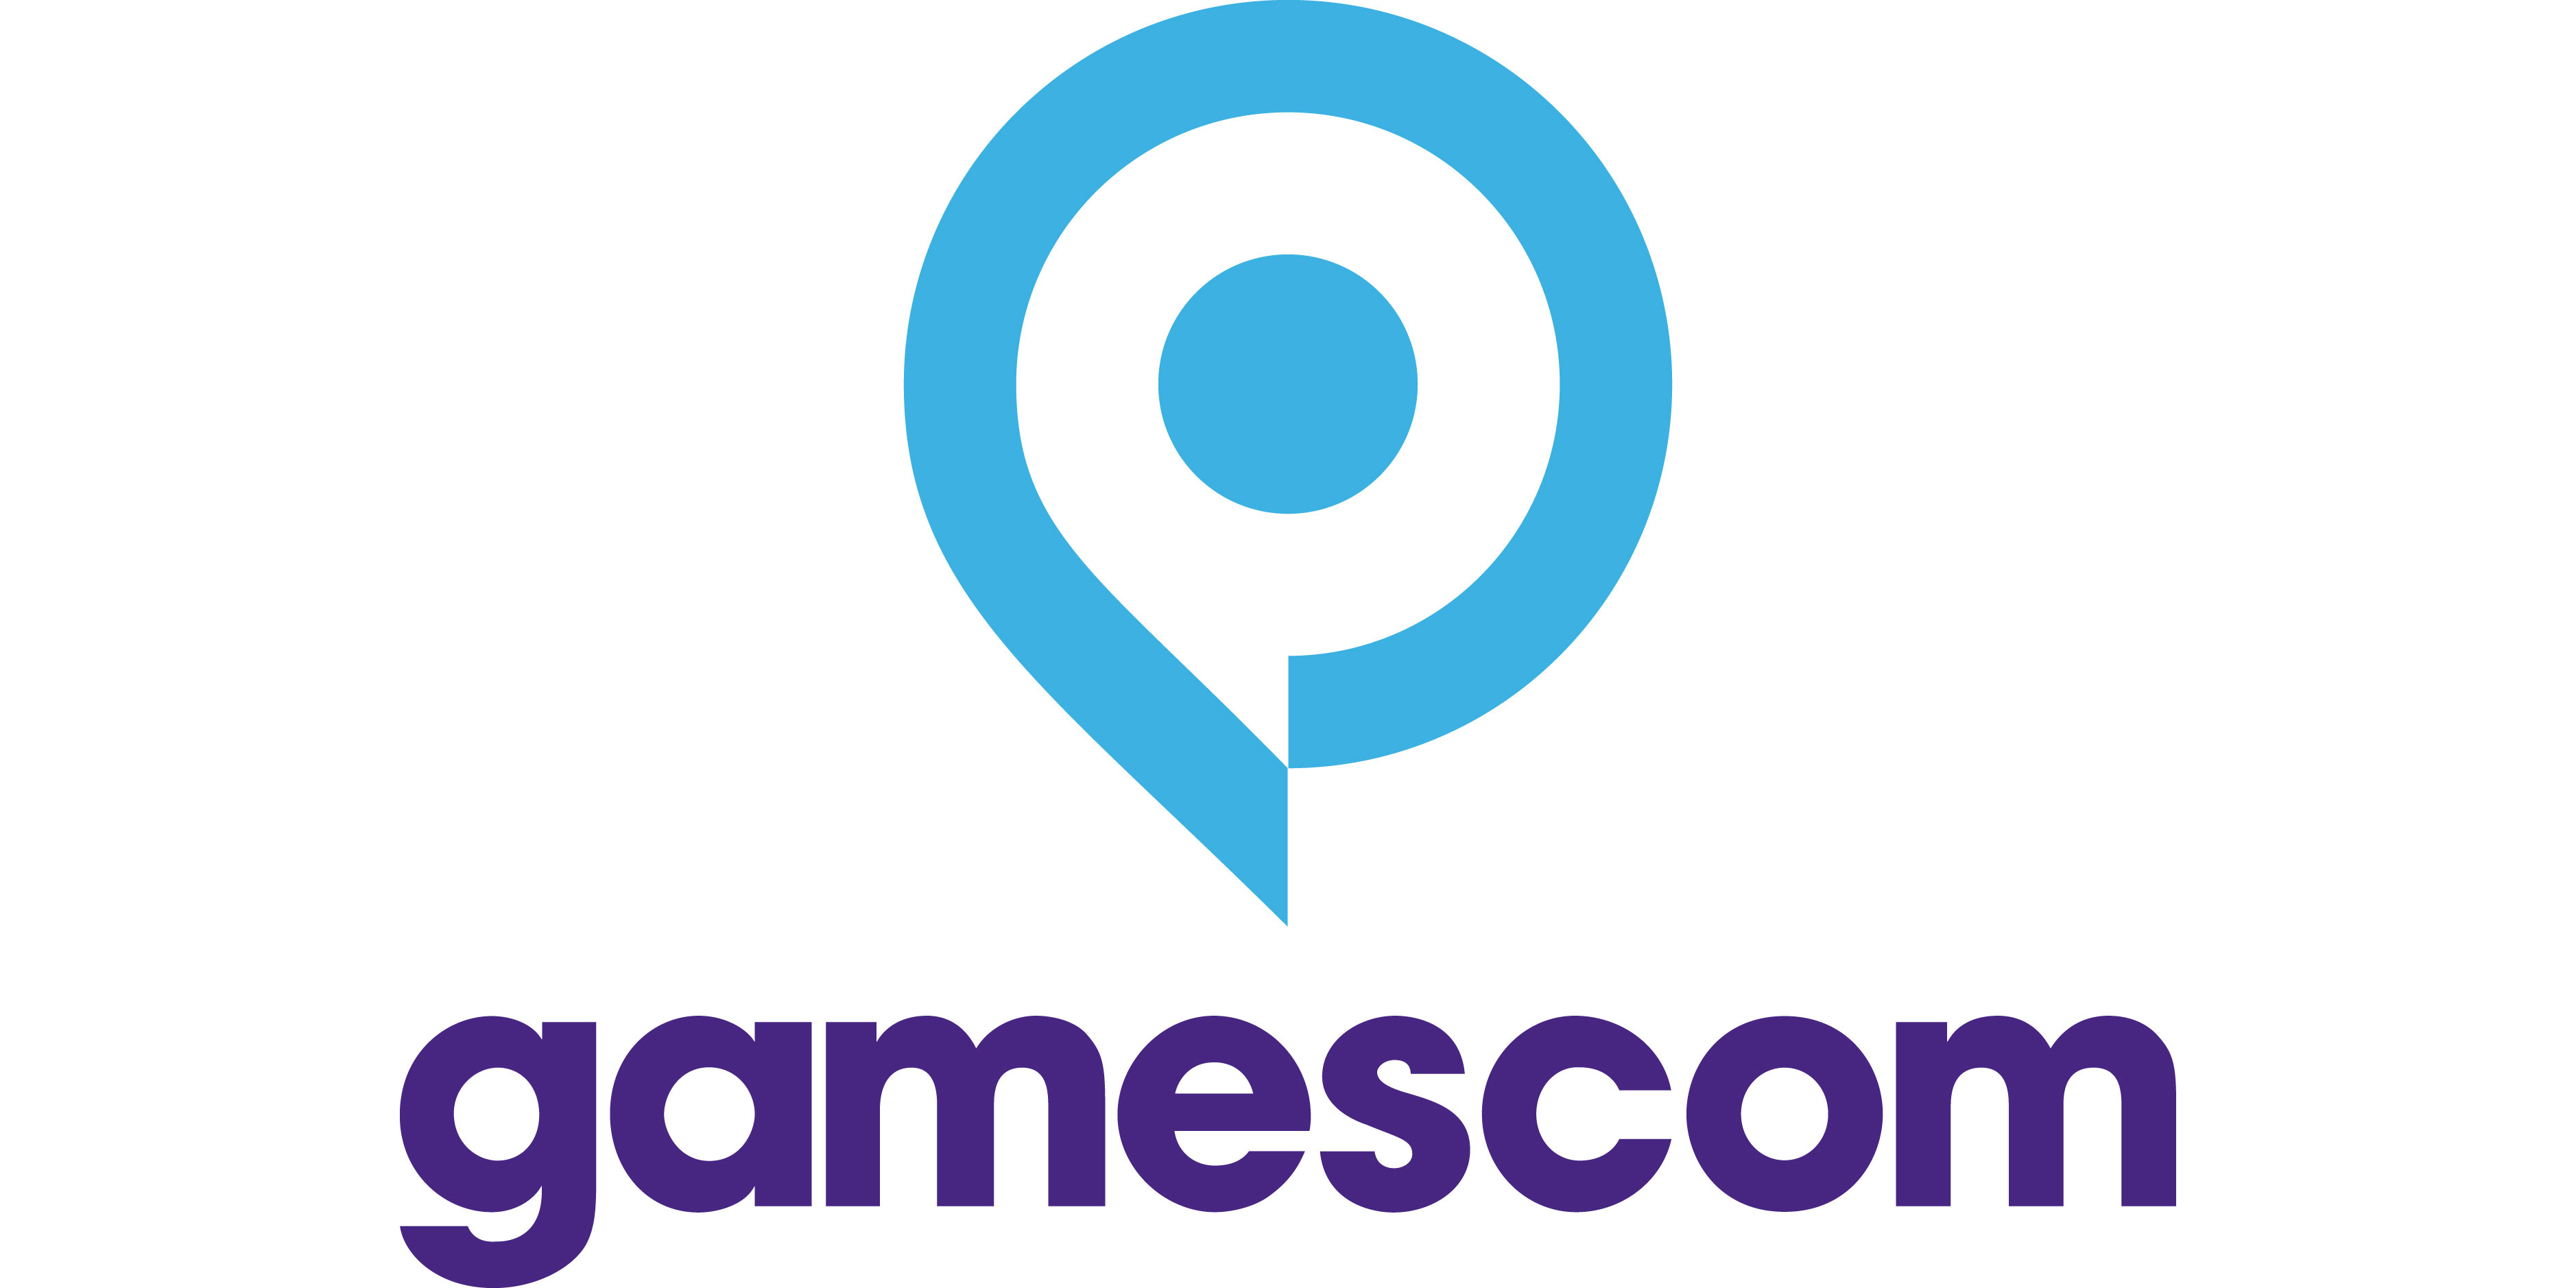 [From the industry] Register now to join Ukie at Gamescom 2022